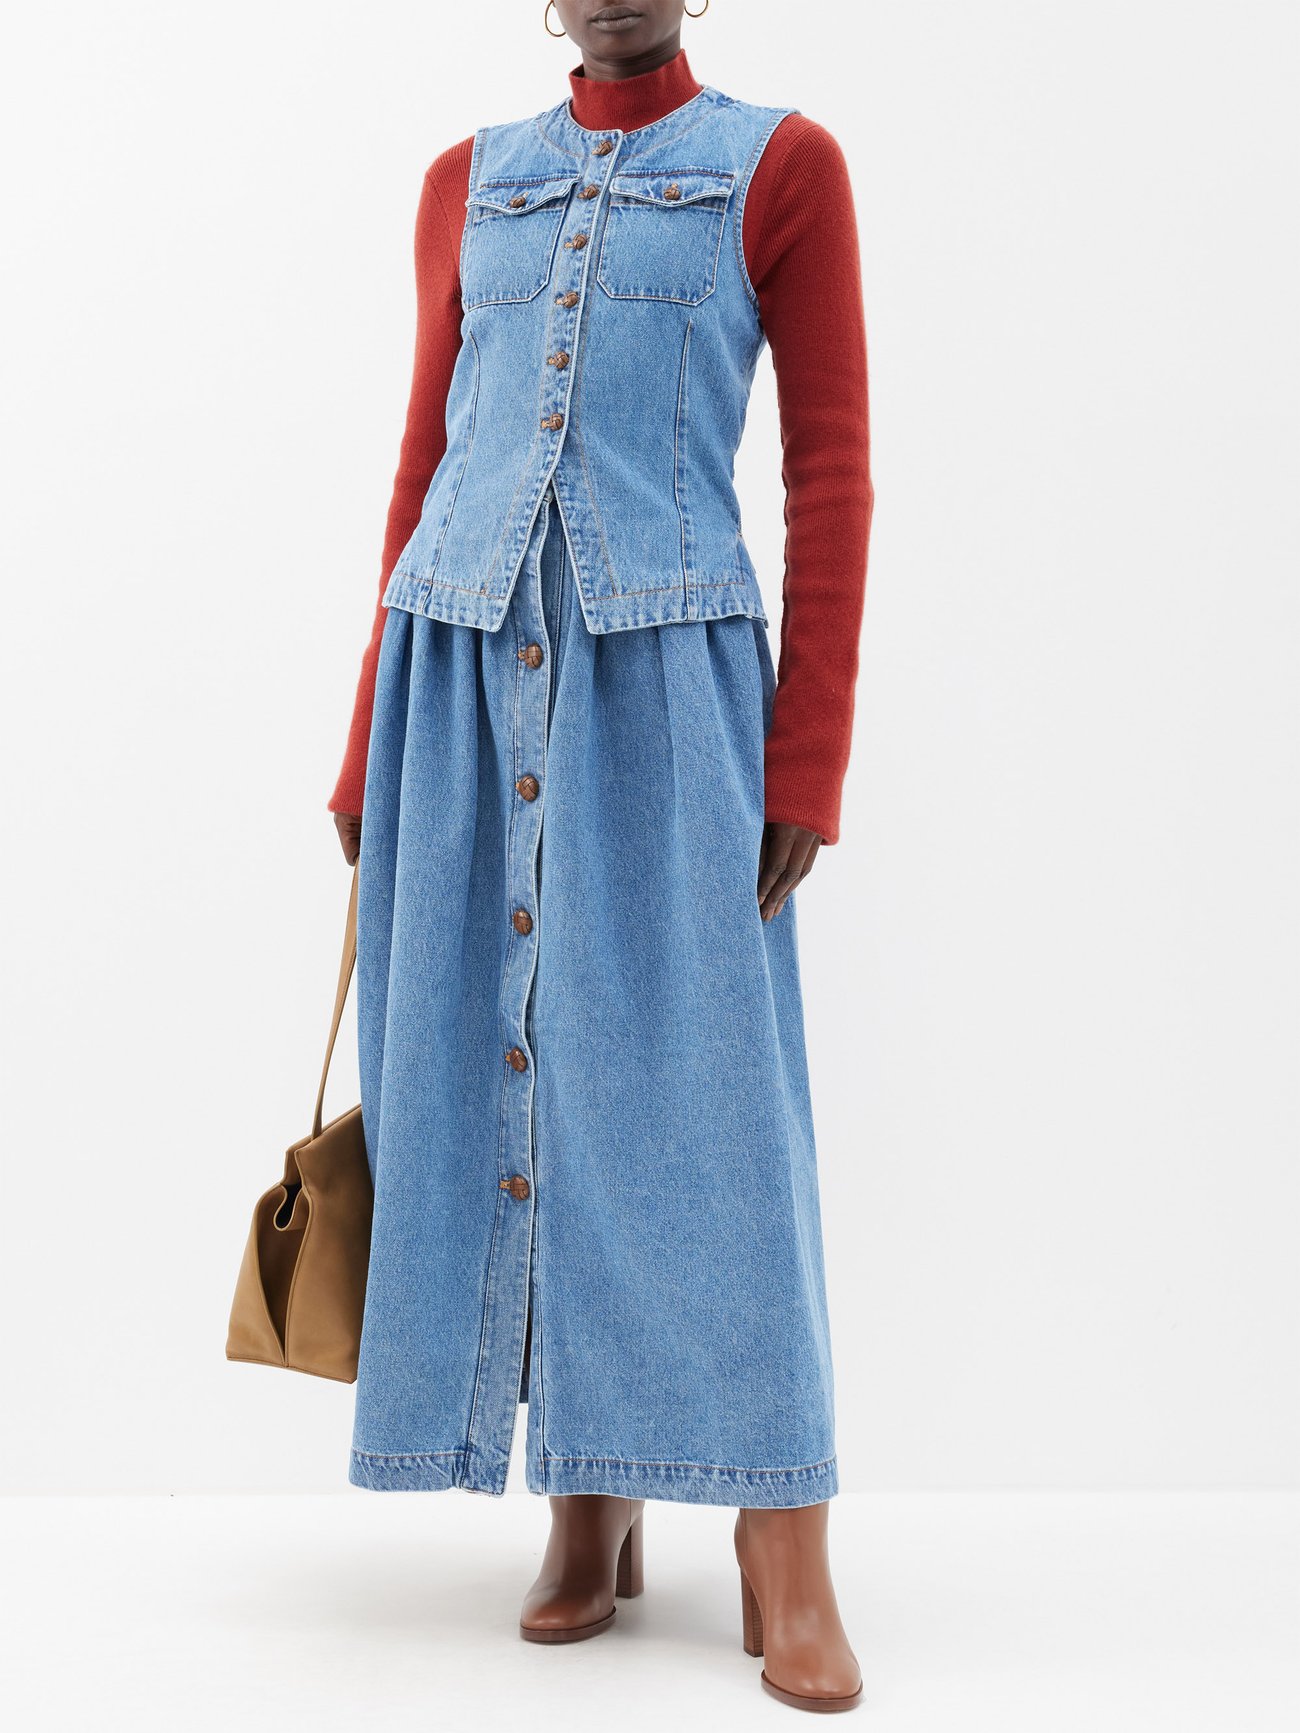 Artisans in Giuliva Heritage's Roman workshop spend six hours handcrafting this blue denim The Lilium skirt, punctuated with a gathered waist and woven leather buttons.